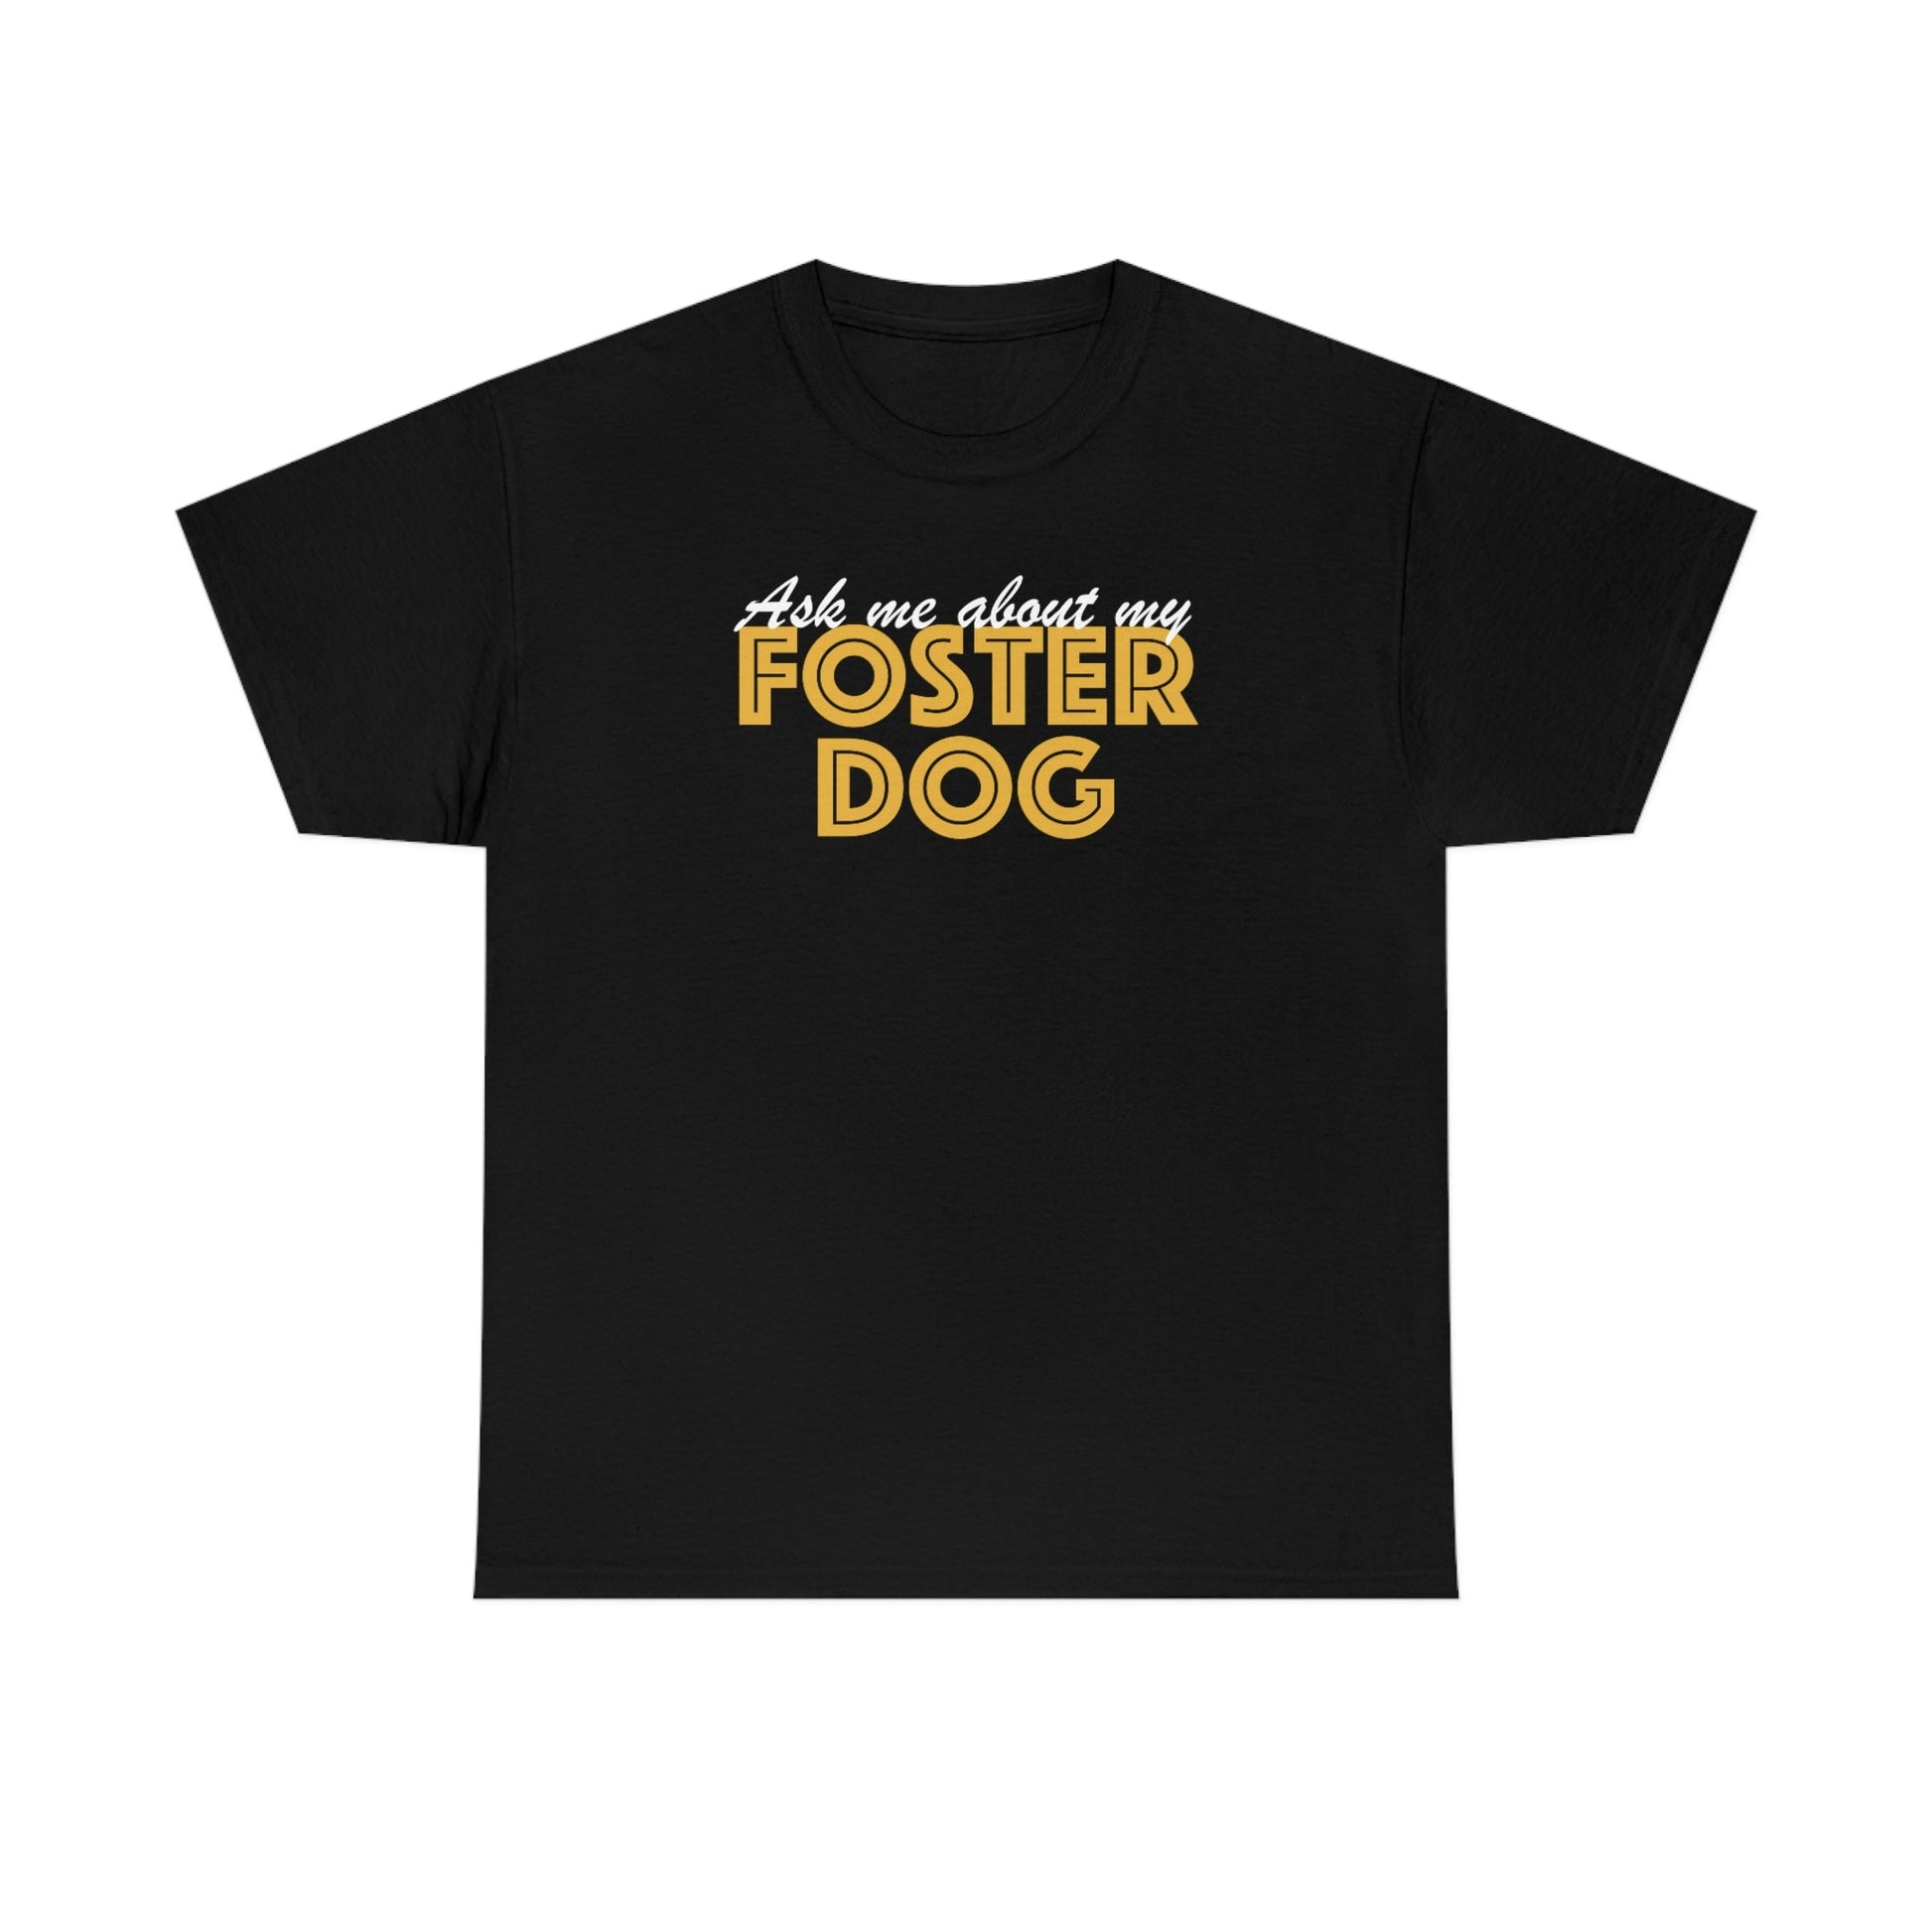 Ask Me About My Foster Dog | Text Tees - Detezi Designs-33572788673814499109